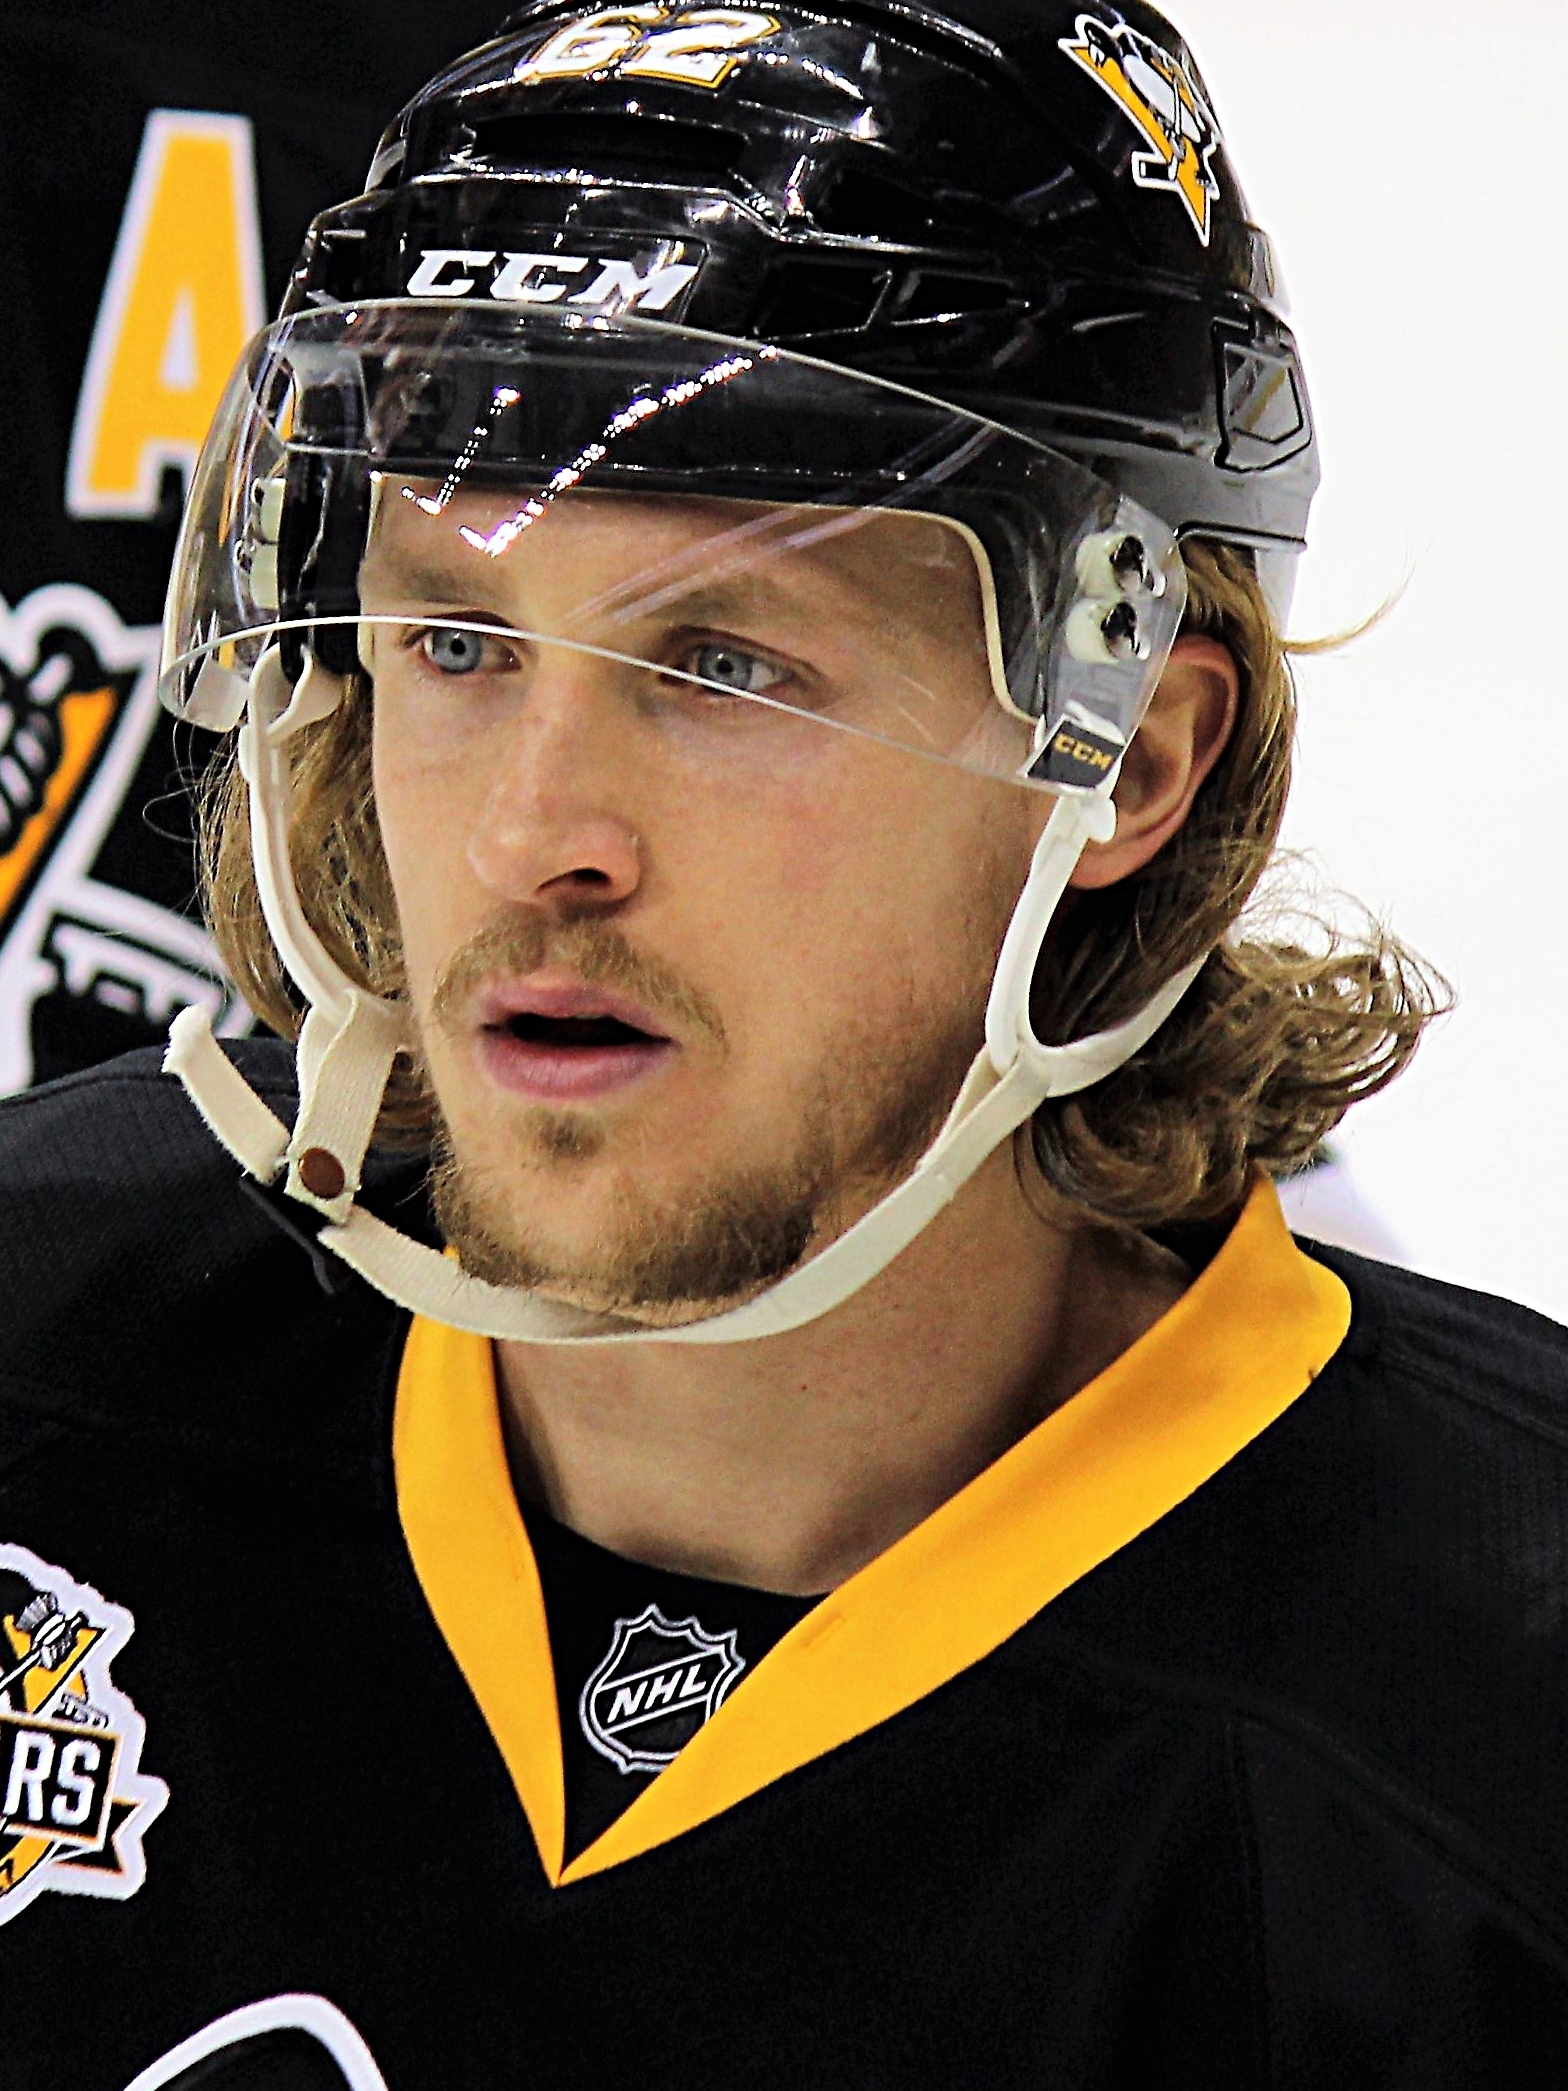 What happened to Carl Hagelin?